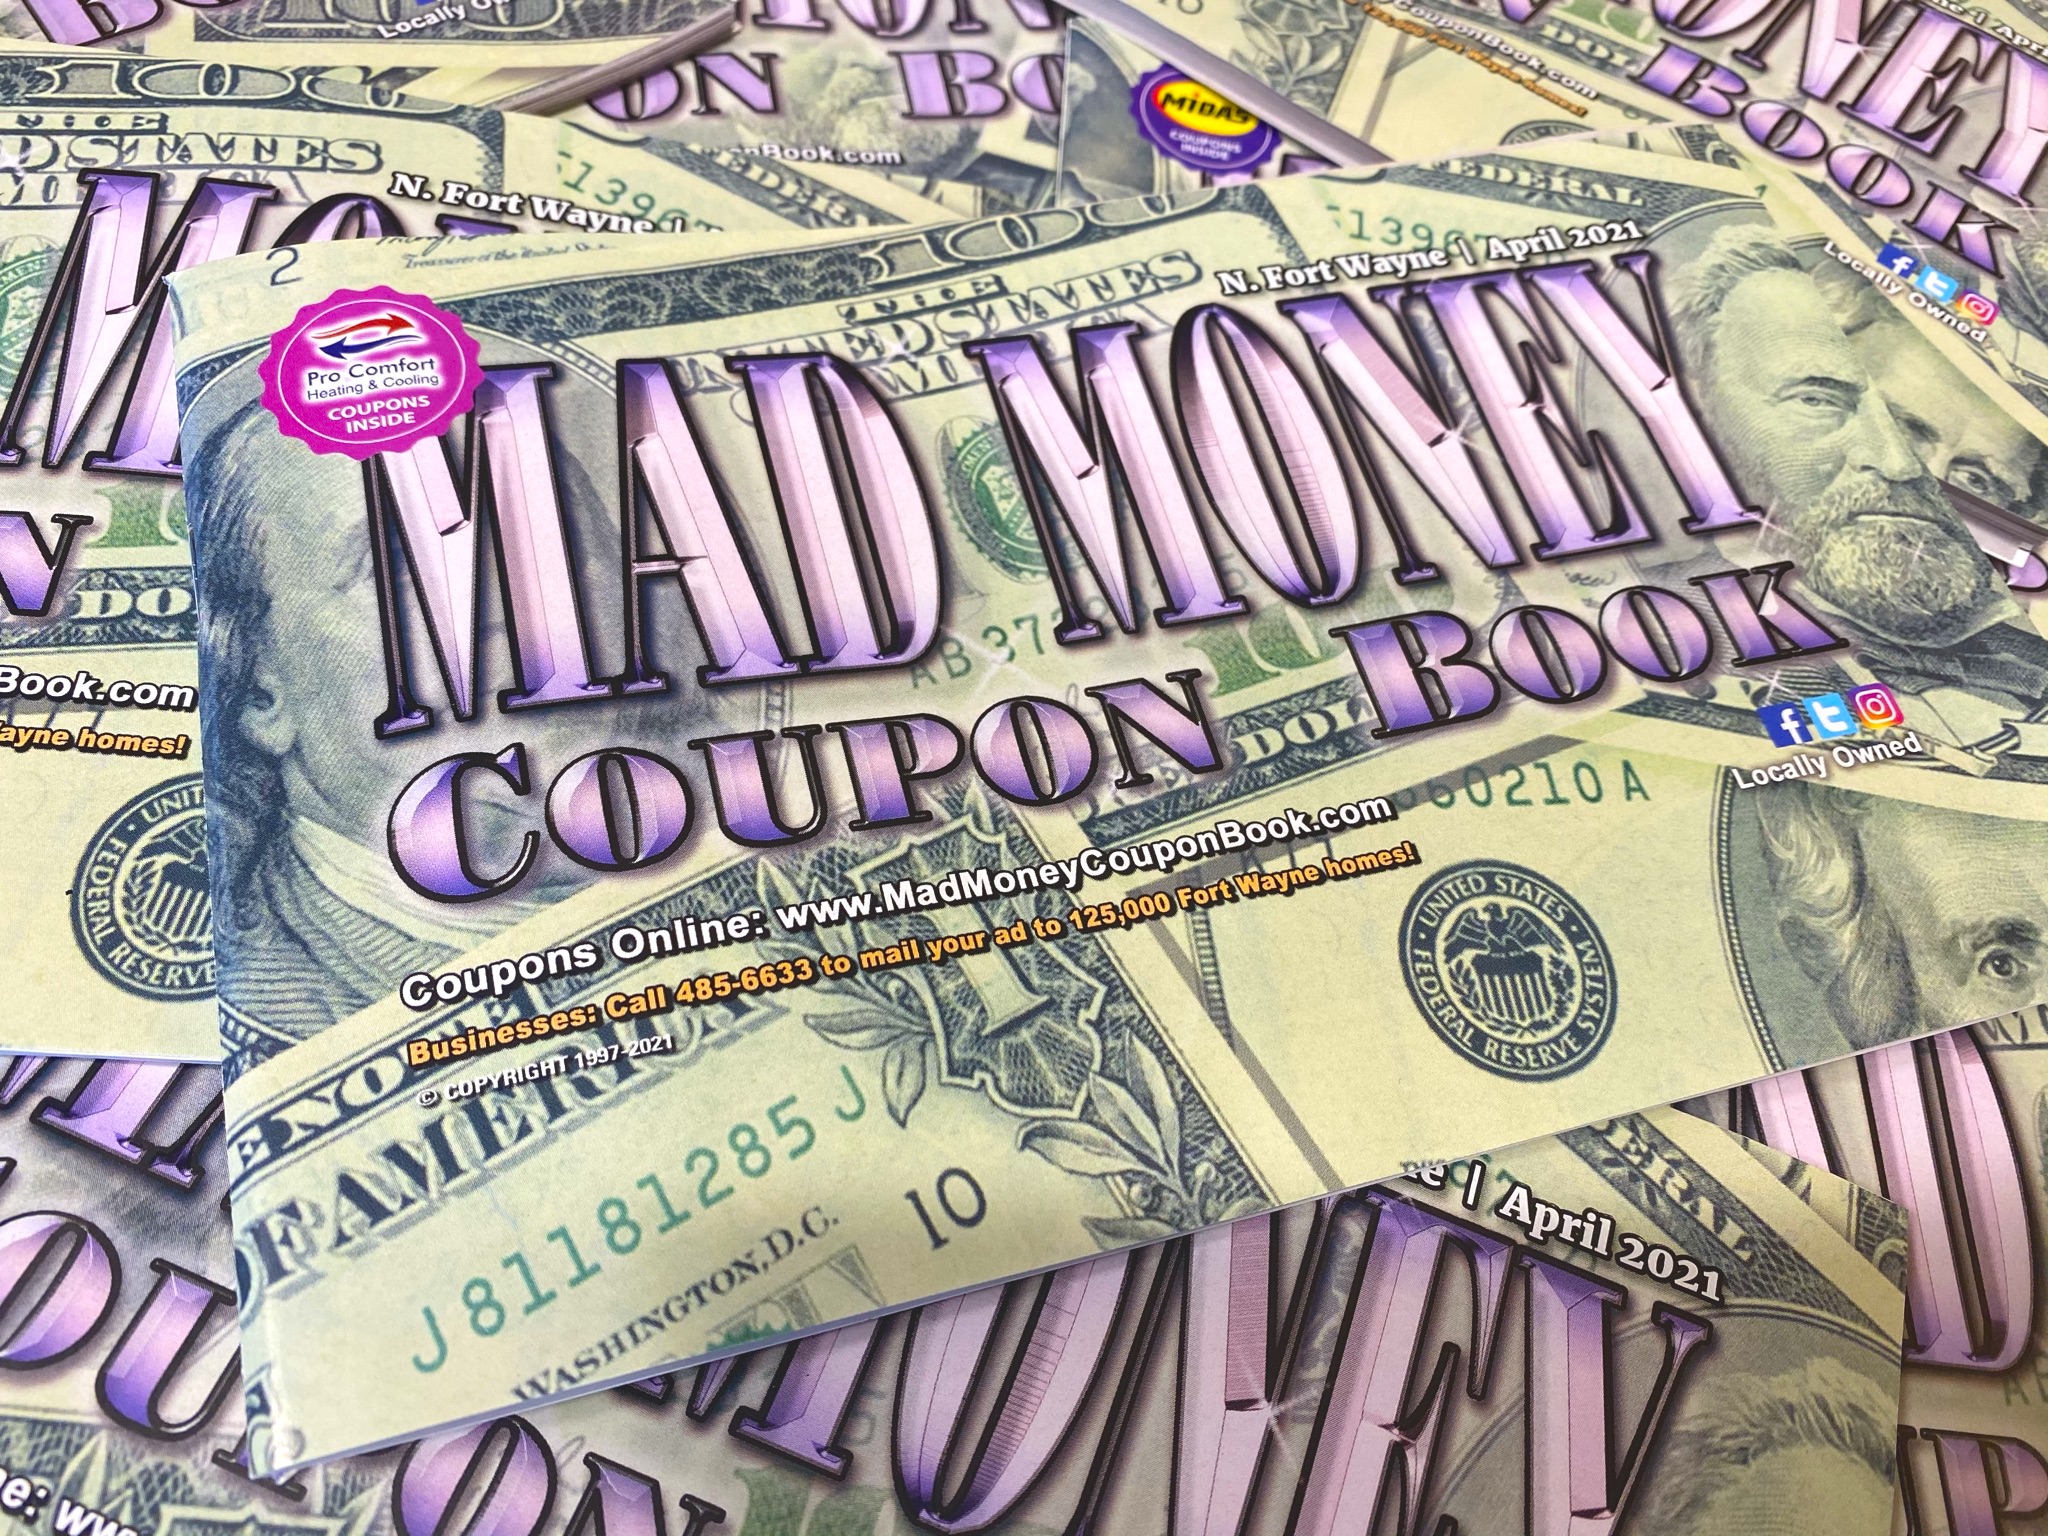 Mad Money Coupon Book on Twitter: 